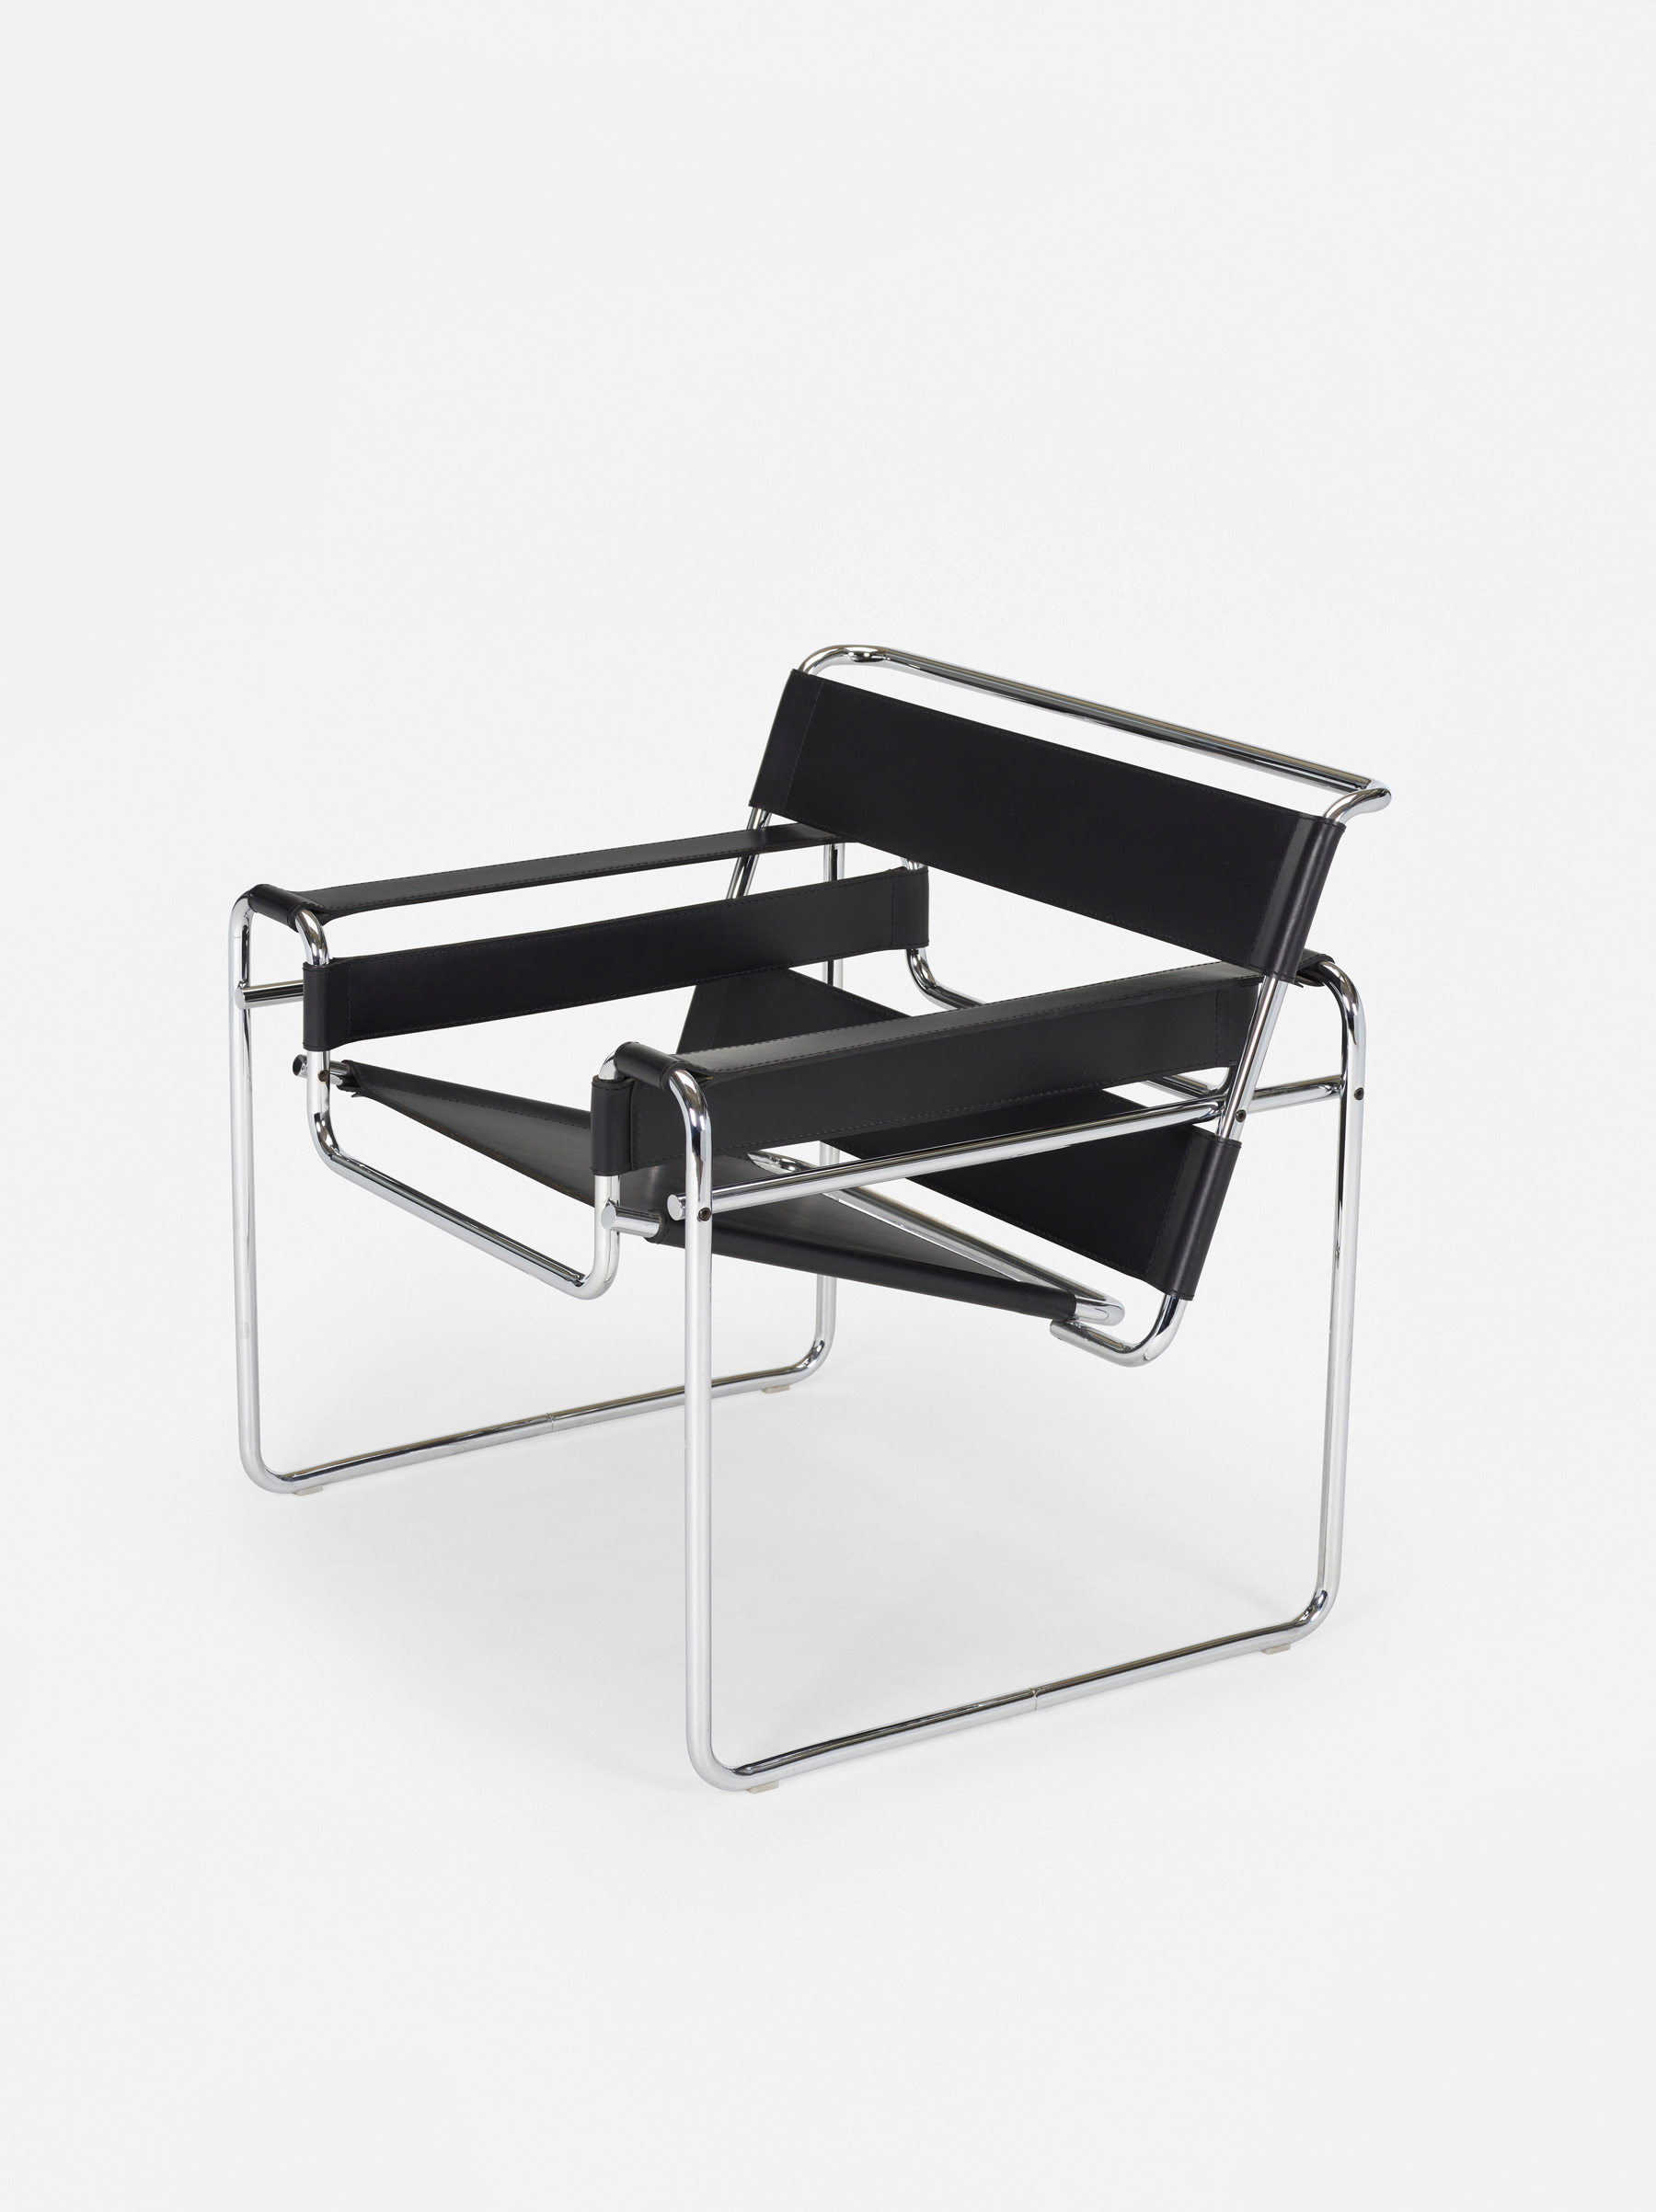 Marcel Breuer, Wassily chair, KnollStudio, Hungary, 1925 / c. 1990, chrome-plated steel, leather, 74 × 79 × 69 cm © Image Copyright by Wright Auction